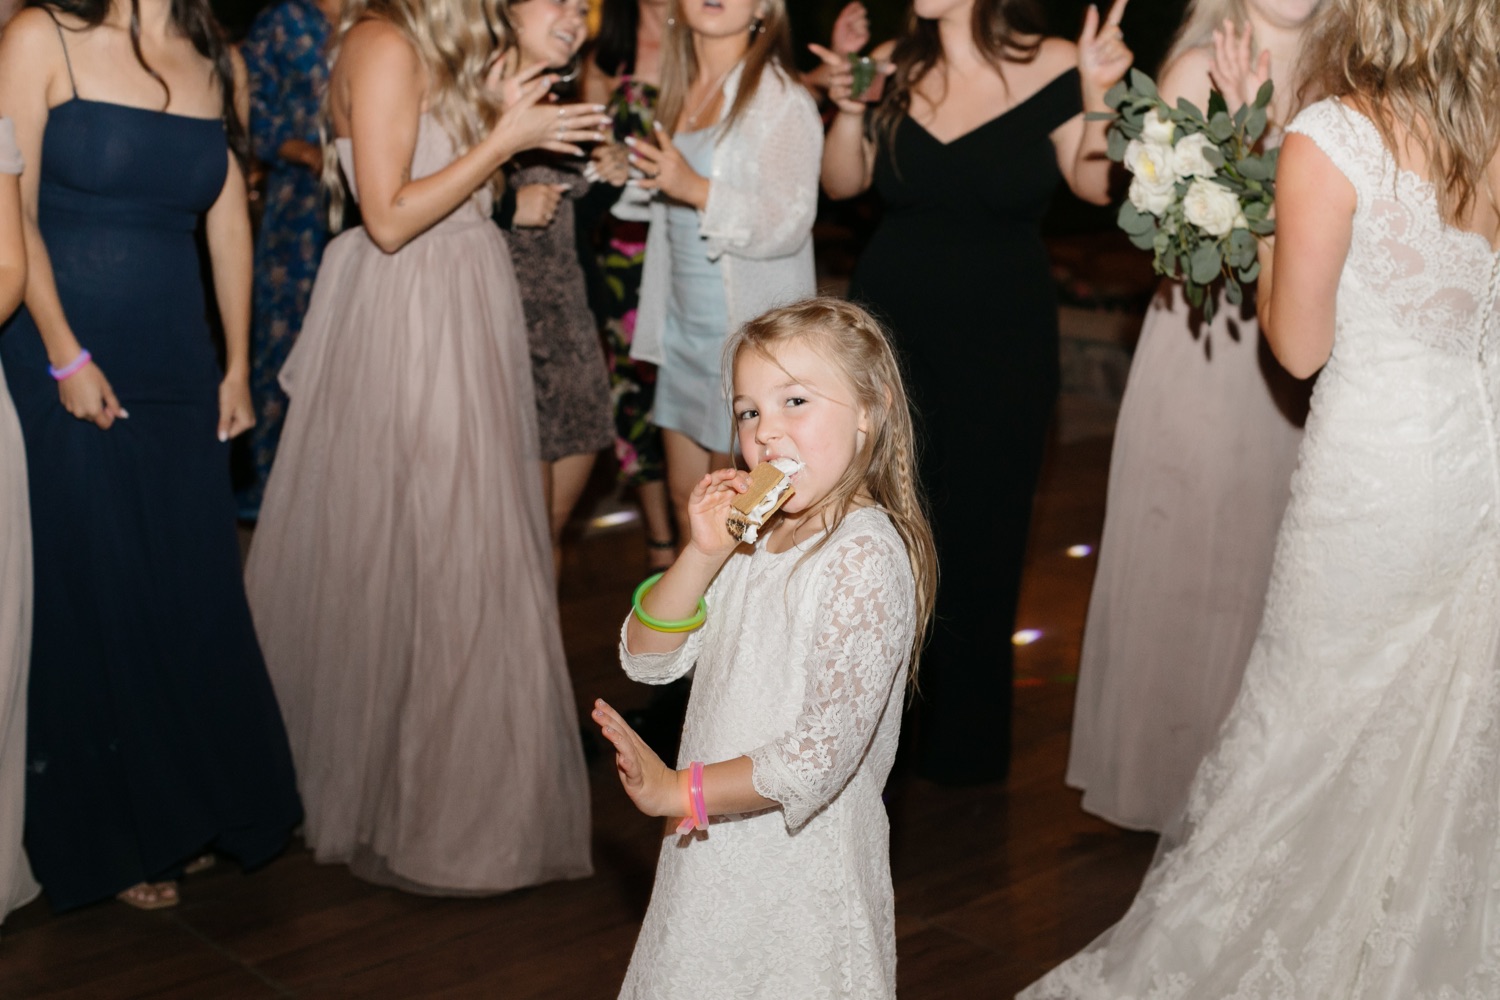 niece and flower girl eating s'mores on the dance floor